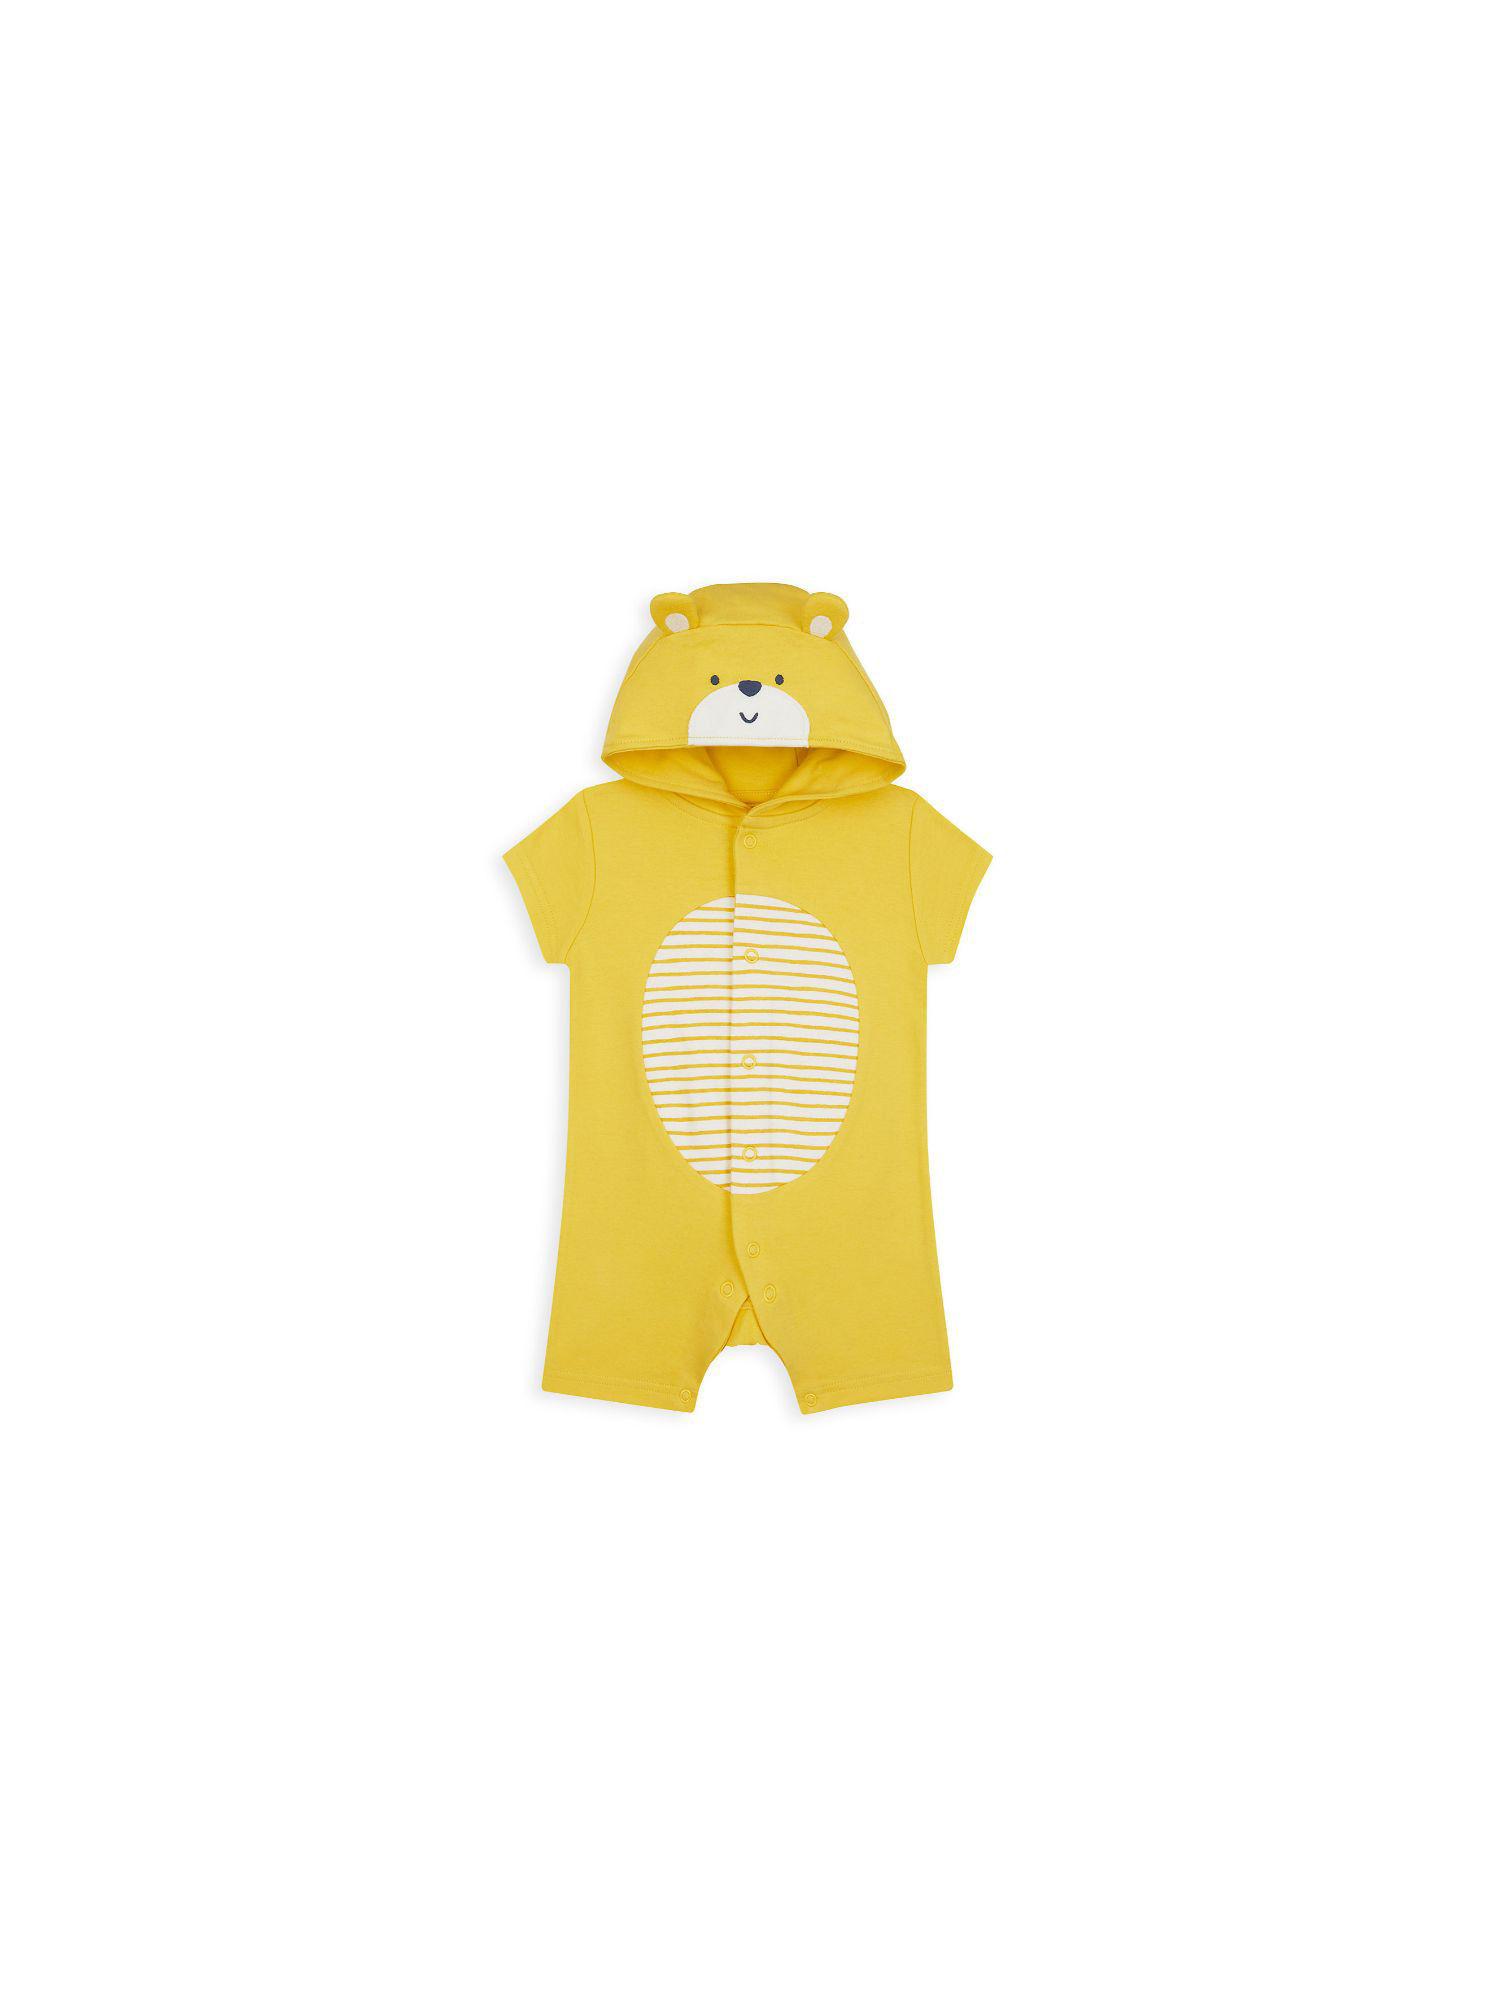 mother care baby onesies & rompers (12-18 months)